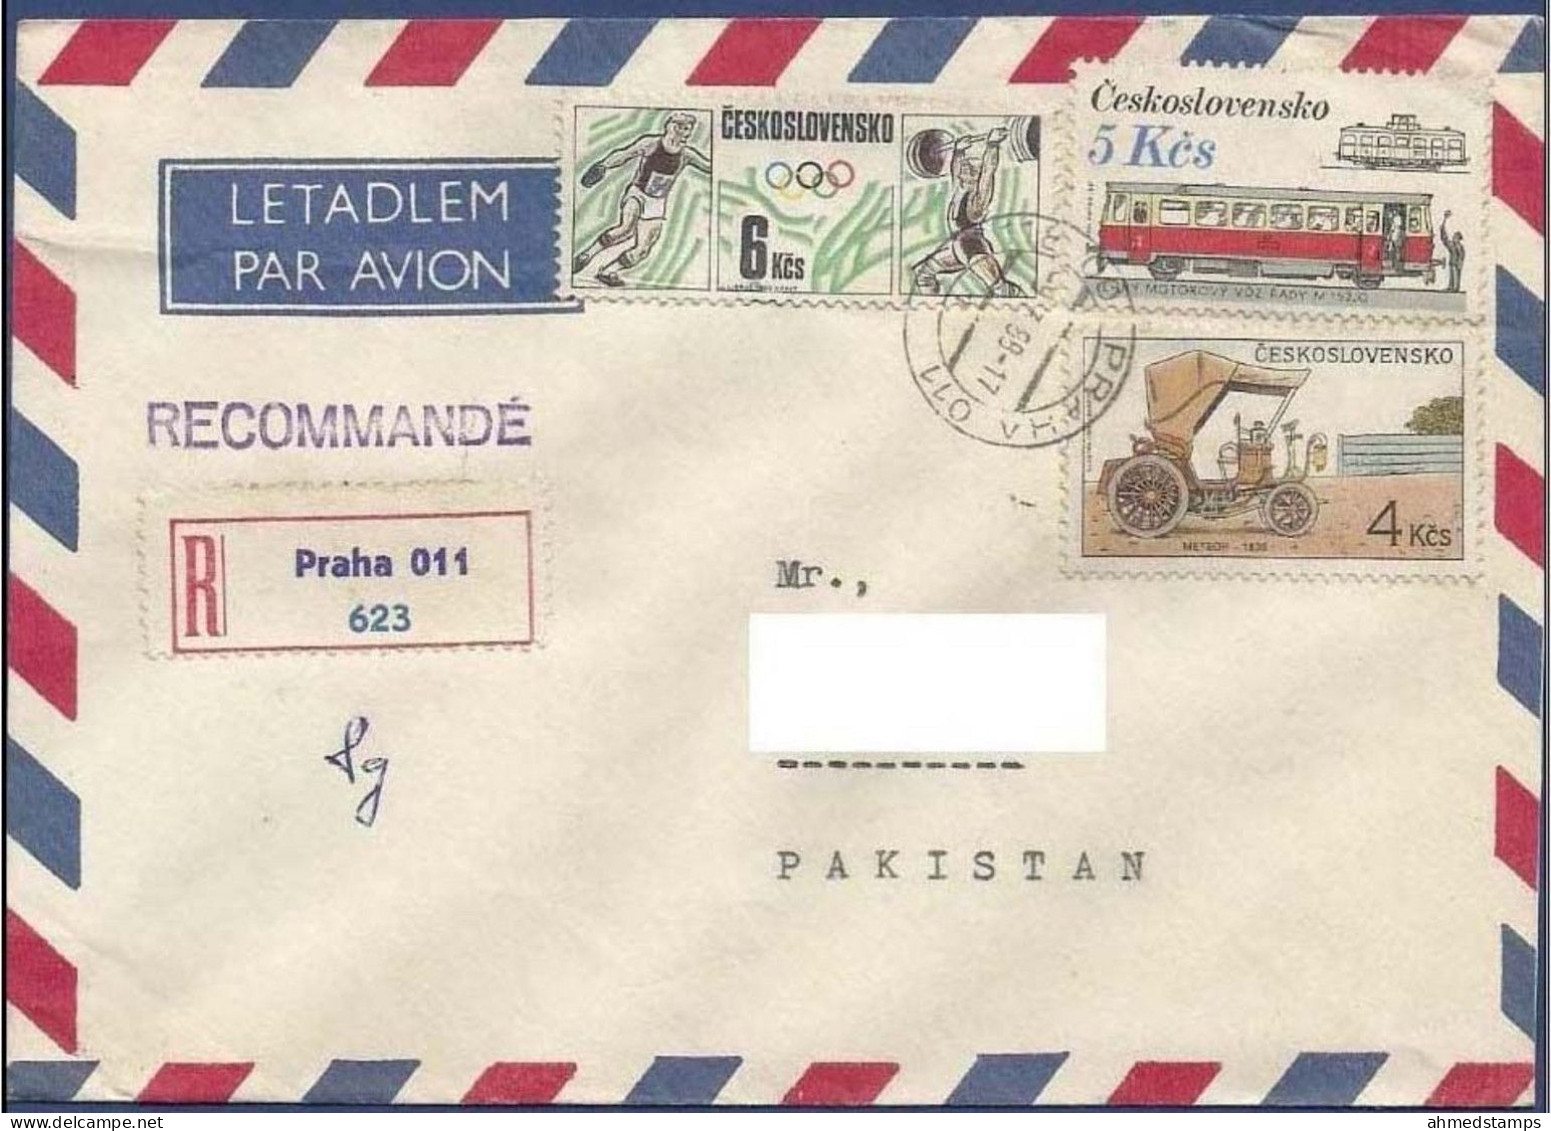 CZECHOSLOVAKIA REGISTERED 1988  POSTAL USED AIRMAIL COVER TO PAKISTAN - Airmail